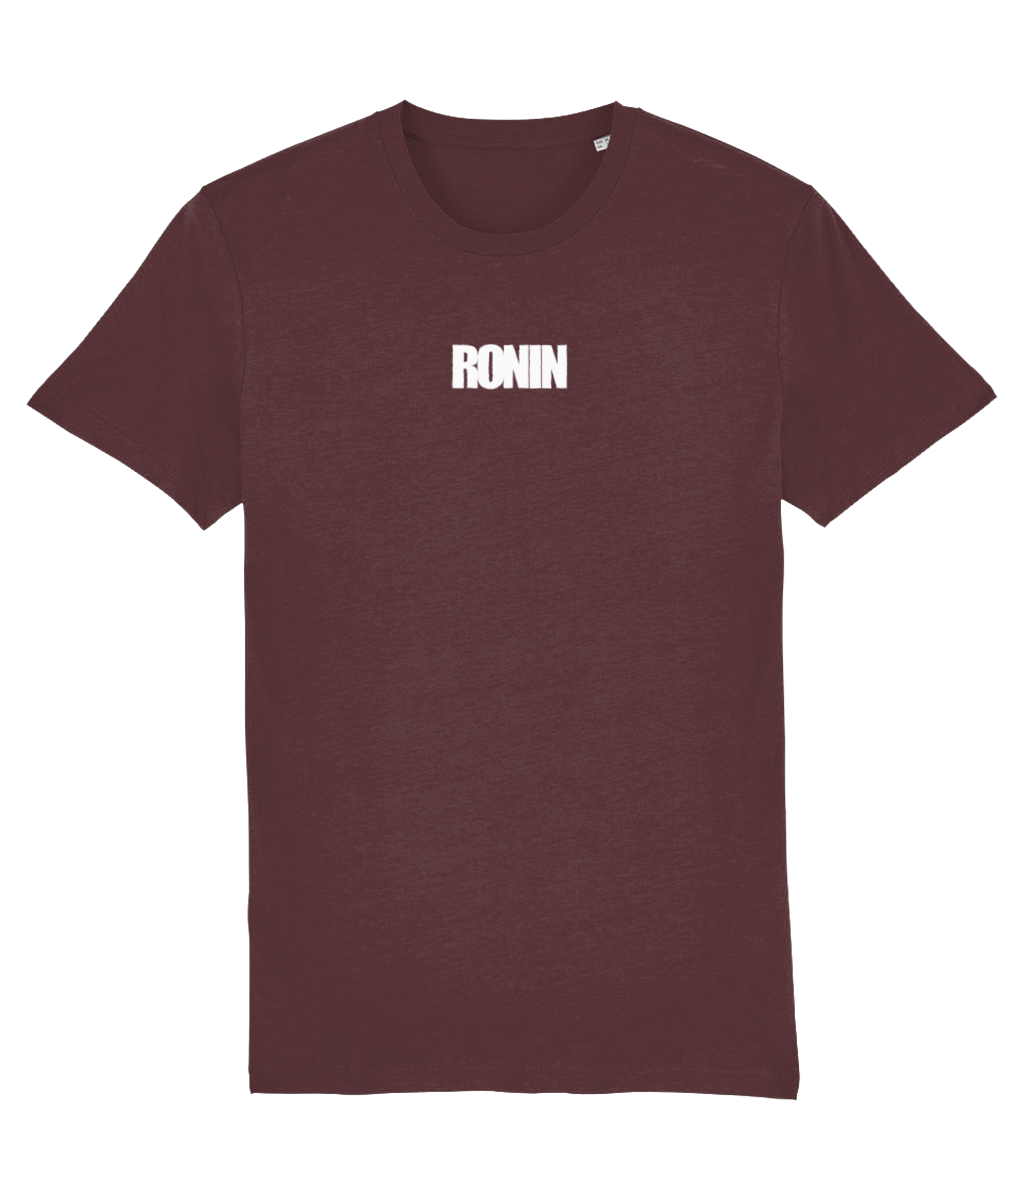 Punch Out Ronin tee